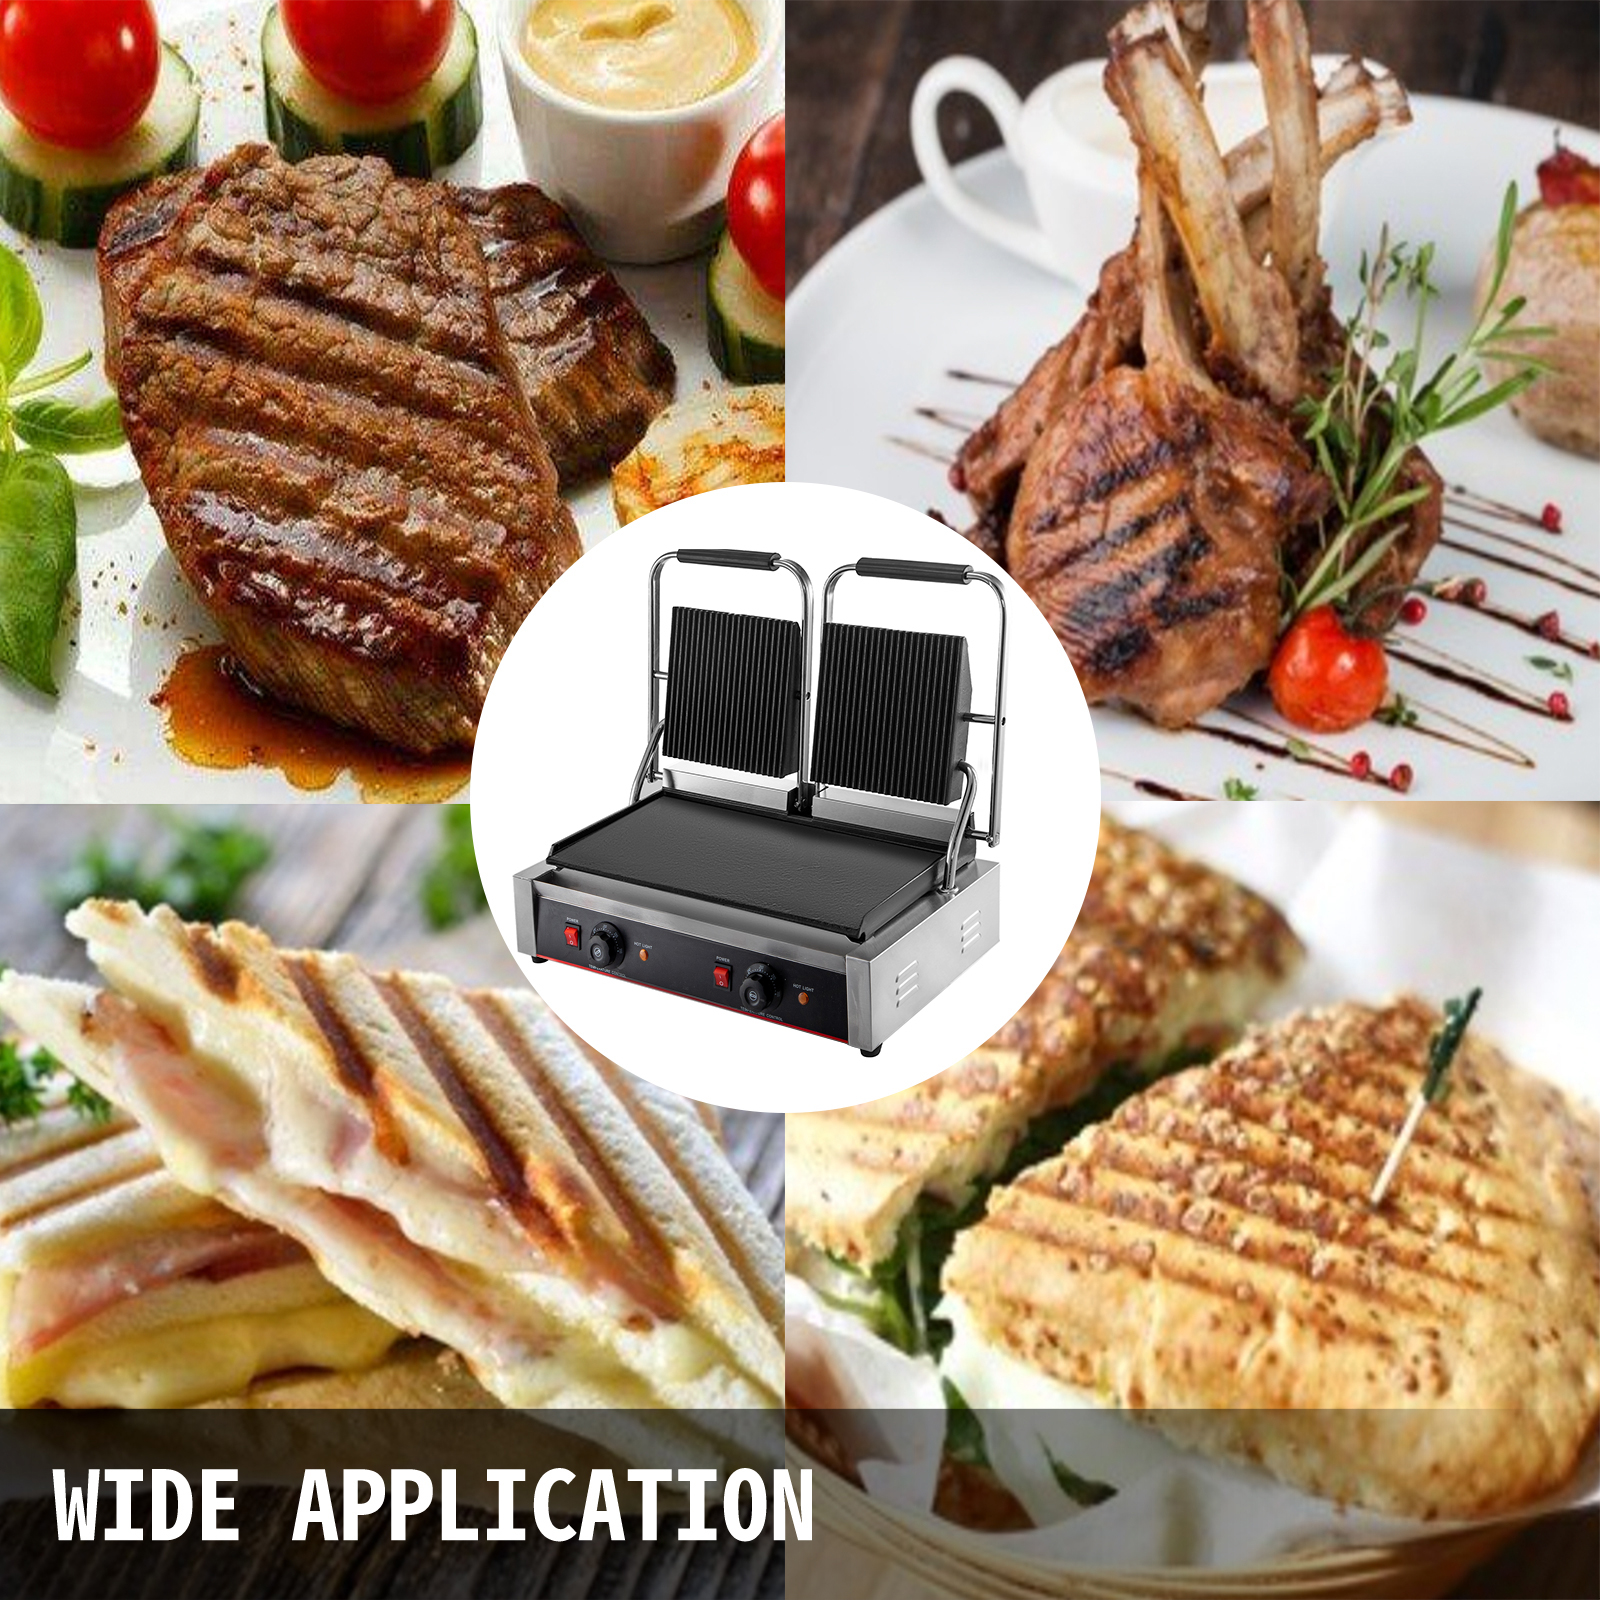 commercial panini press grill, double half grooved plates, 3.6kw